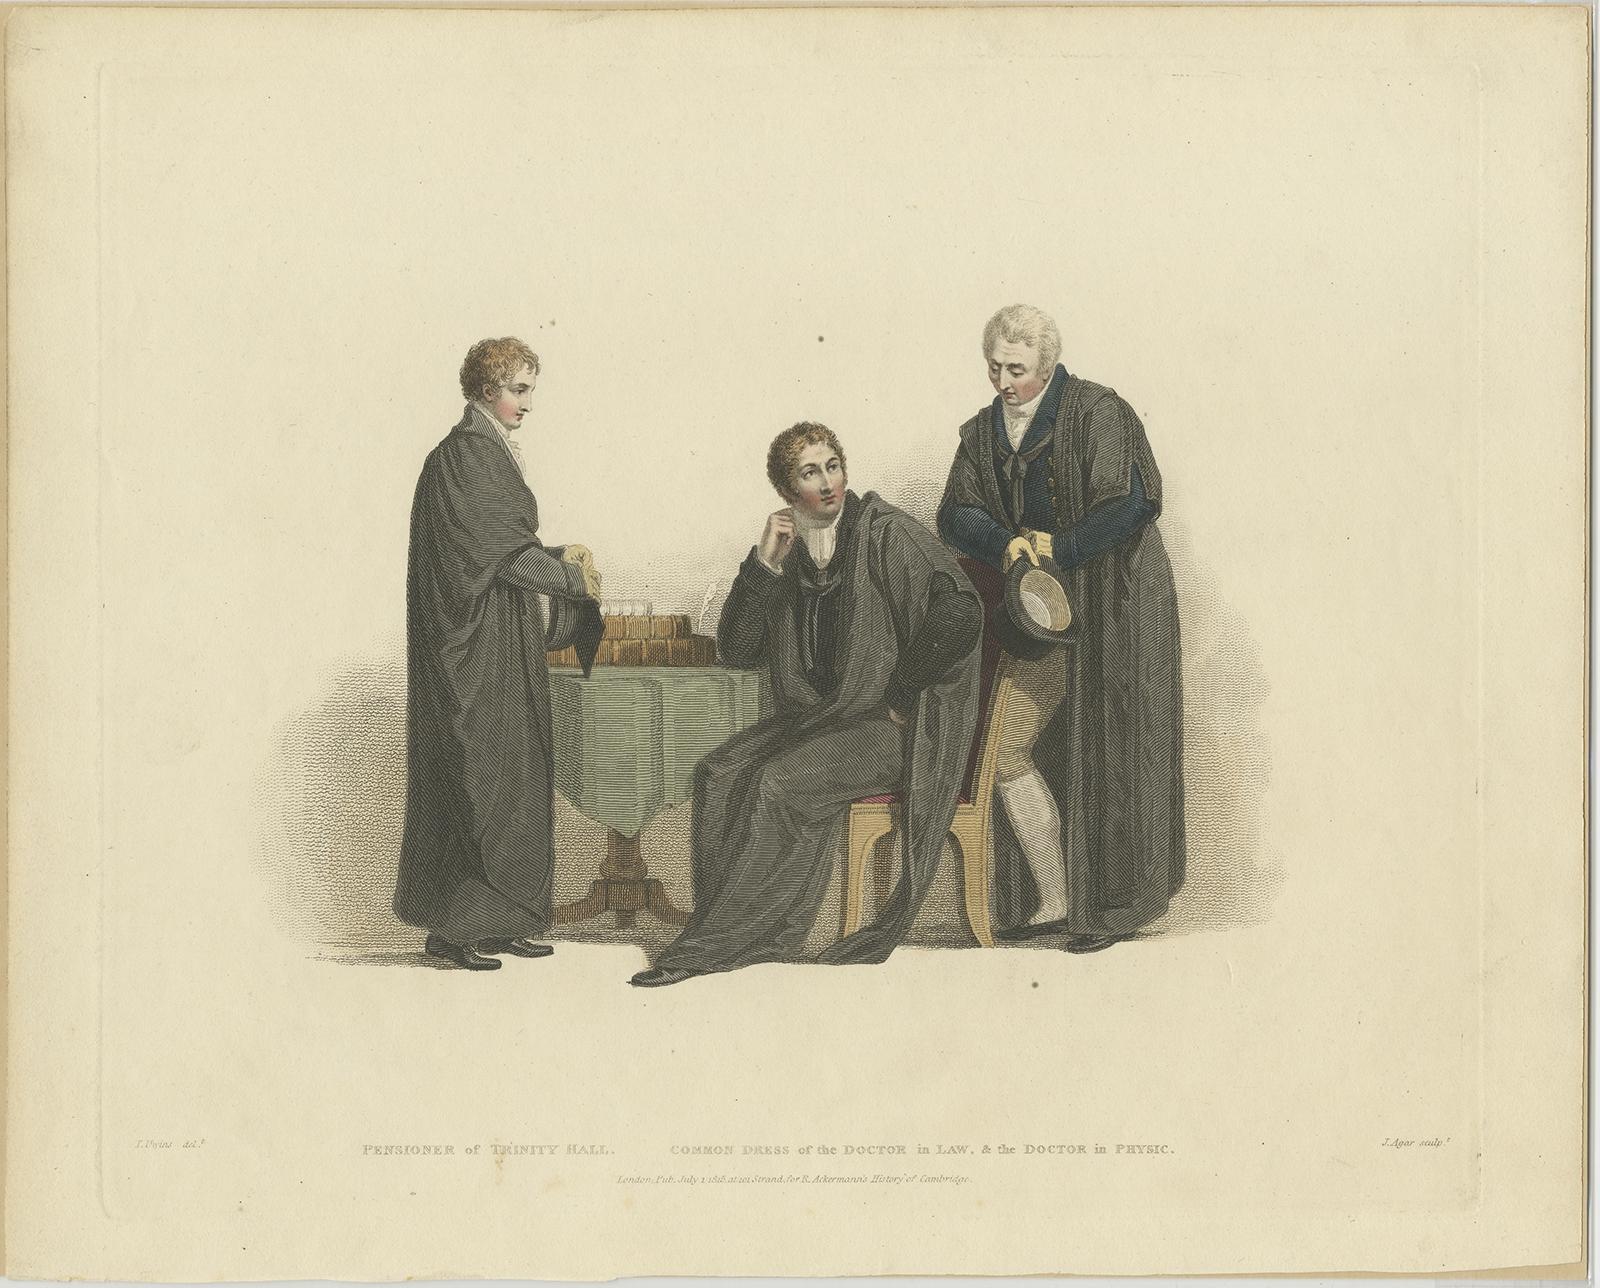 Antique print titled 'Pensioner of Trinity Hall - Common Dress of the Doctor in Law & The Doctor in Physic'. 

Portraits of three men in academic costumes; a Pensioner of Trinity Hall standing at left in profile to right, at a table on which lie